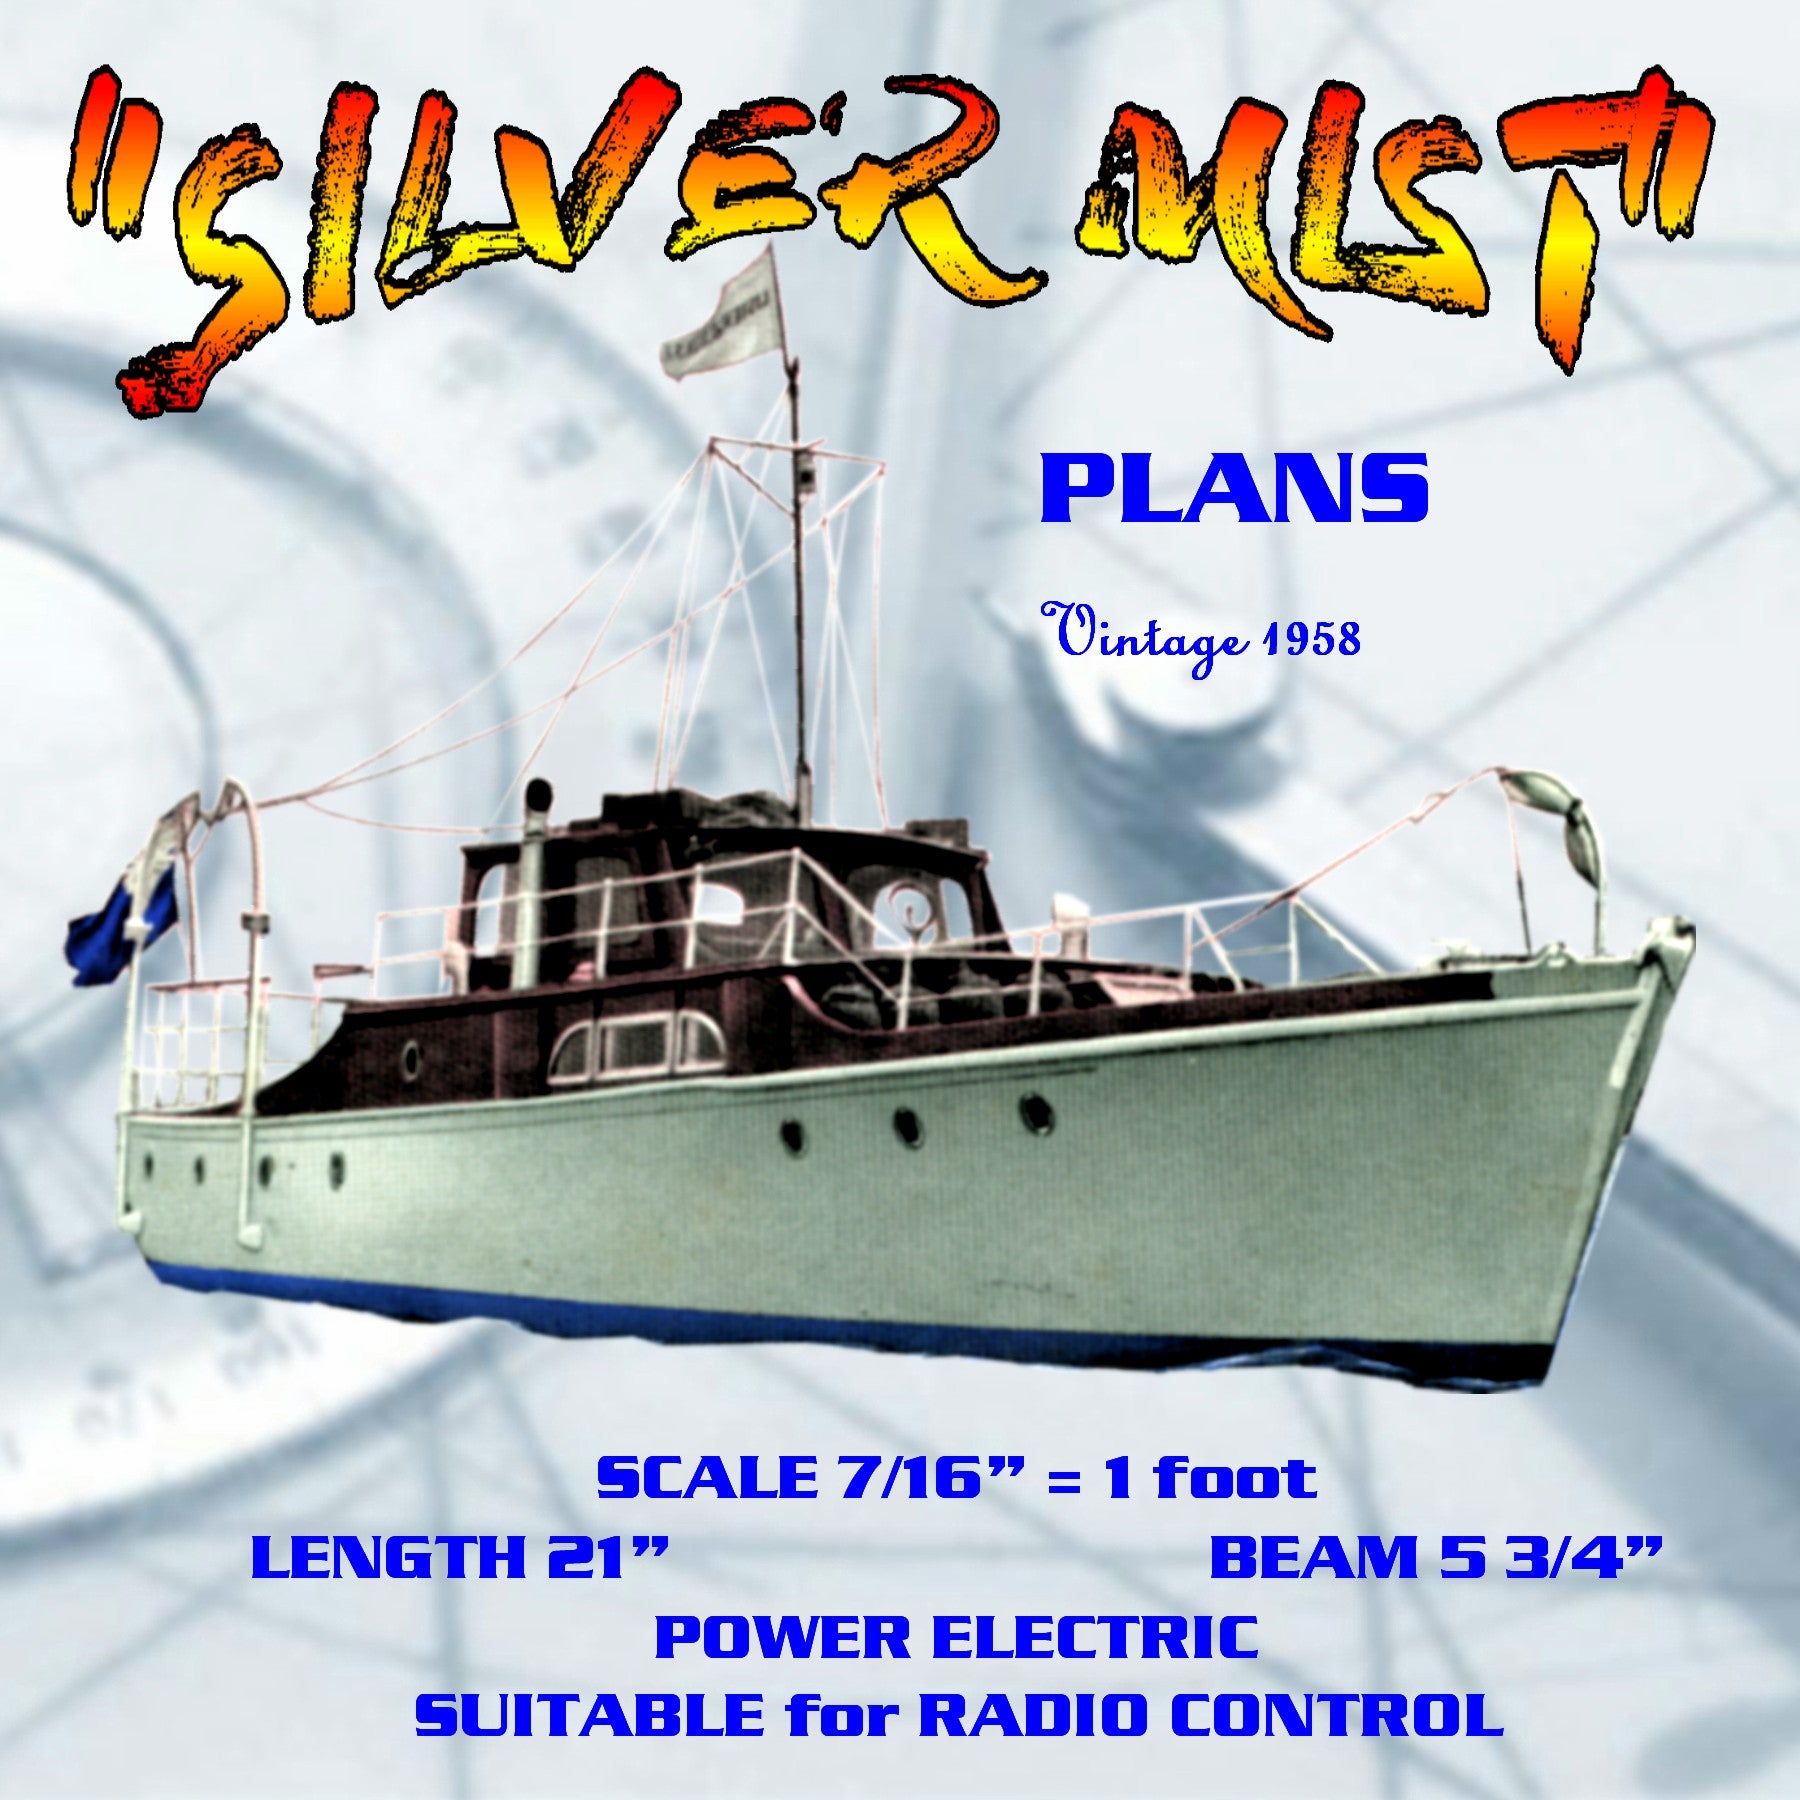 full size printed plan  for beginners vintage cabin curiser scale 7/16” = 1' “silver mist” for radio control